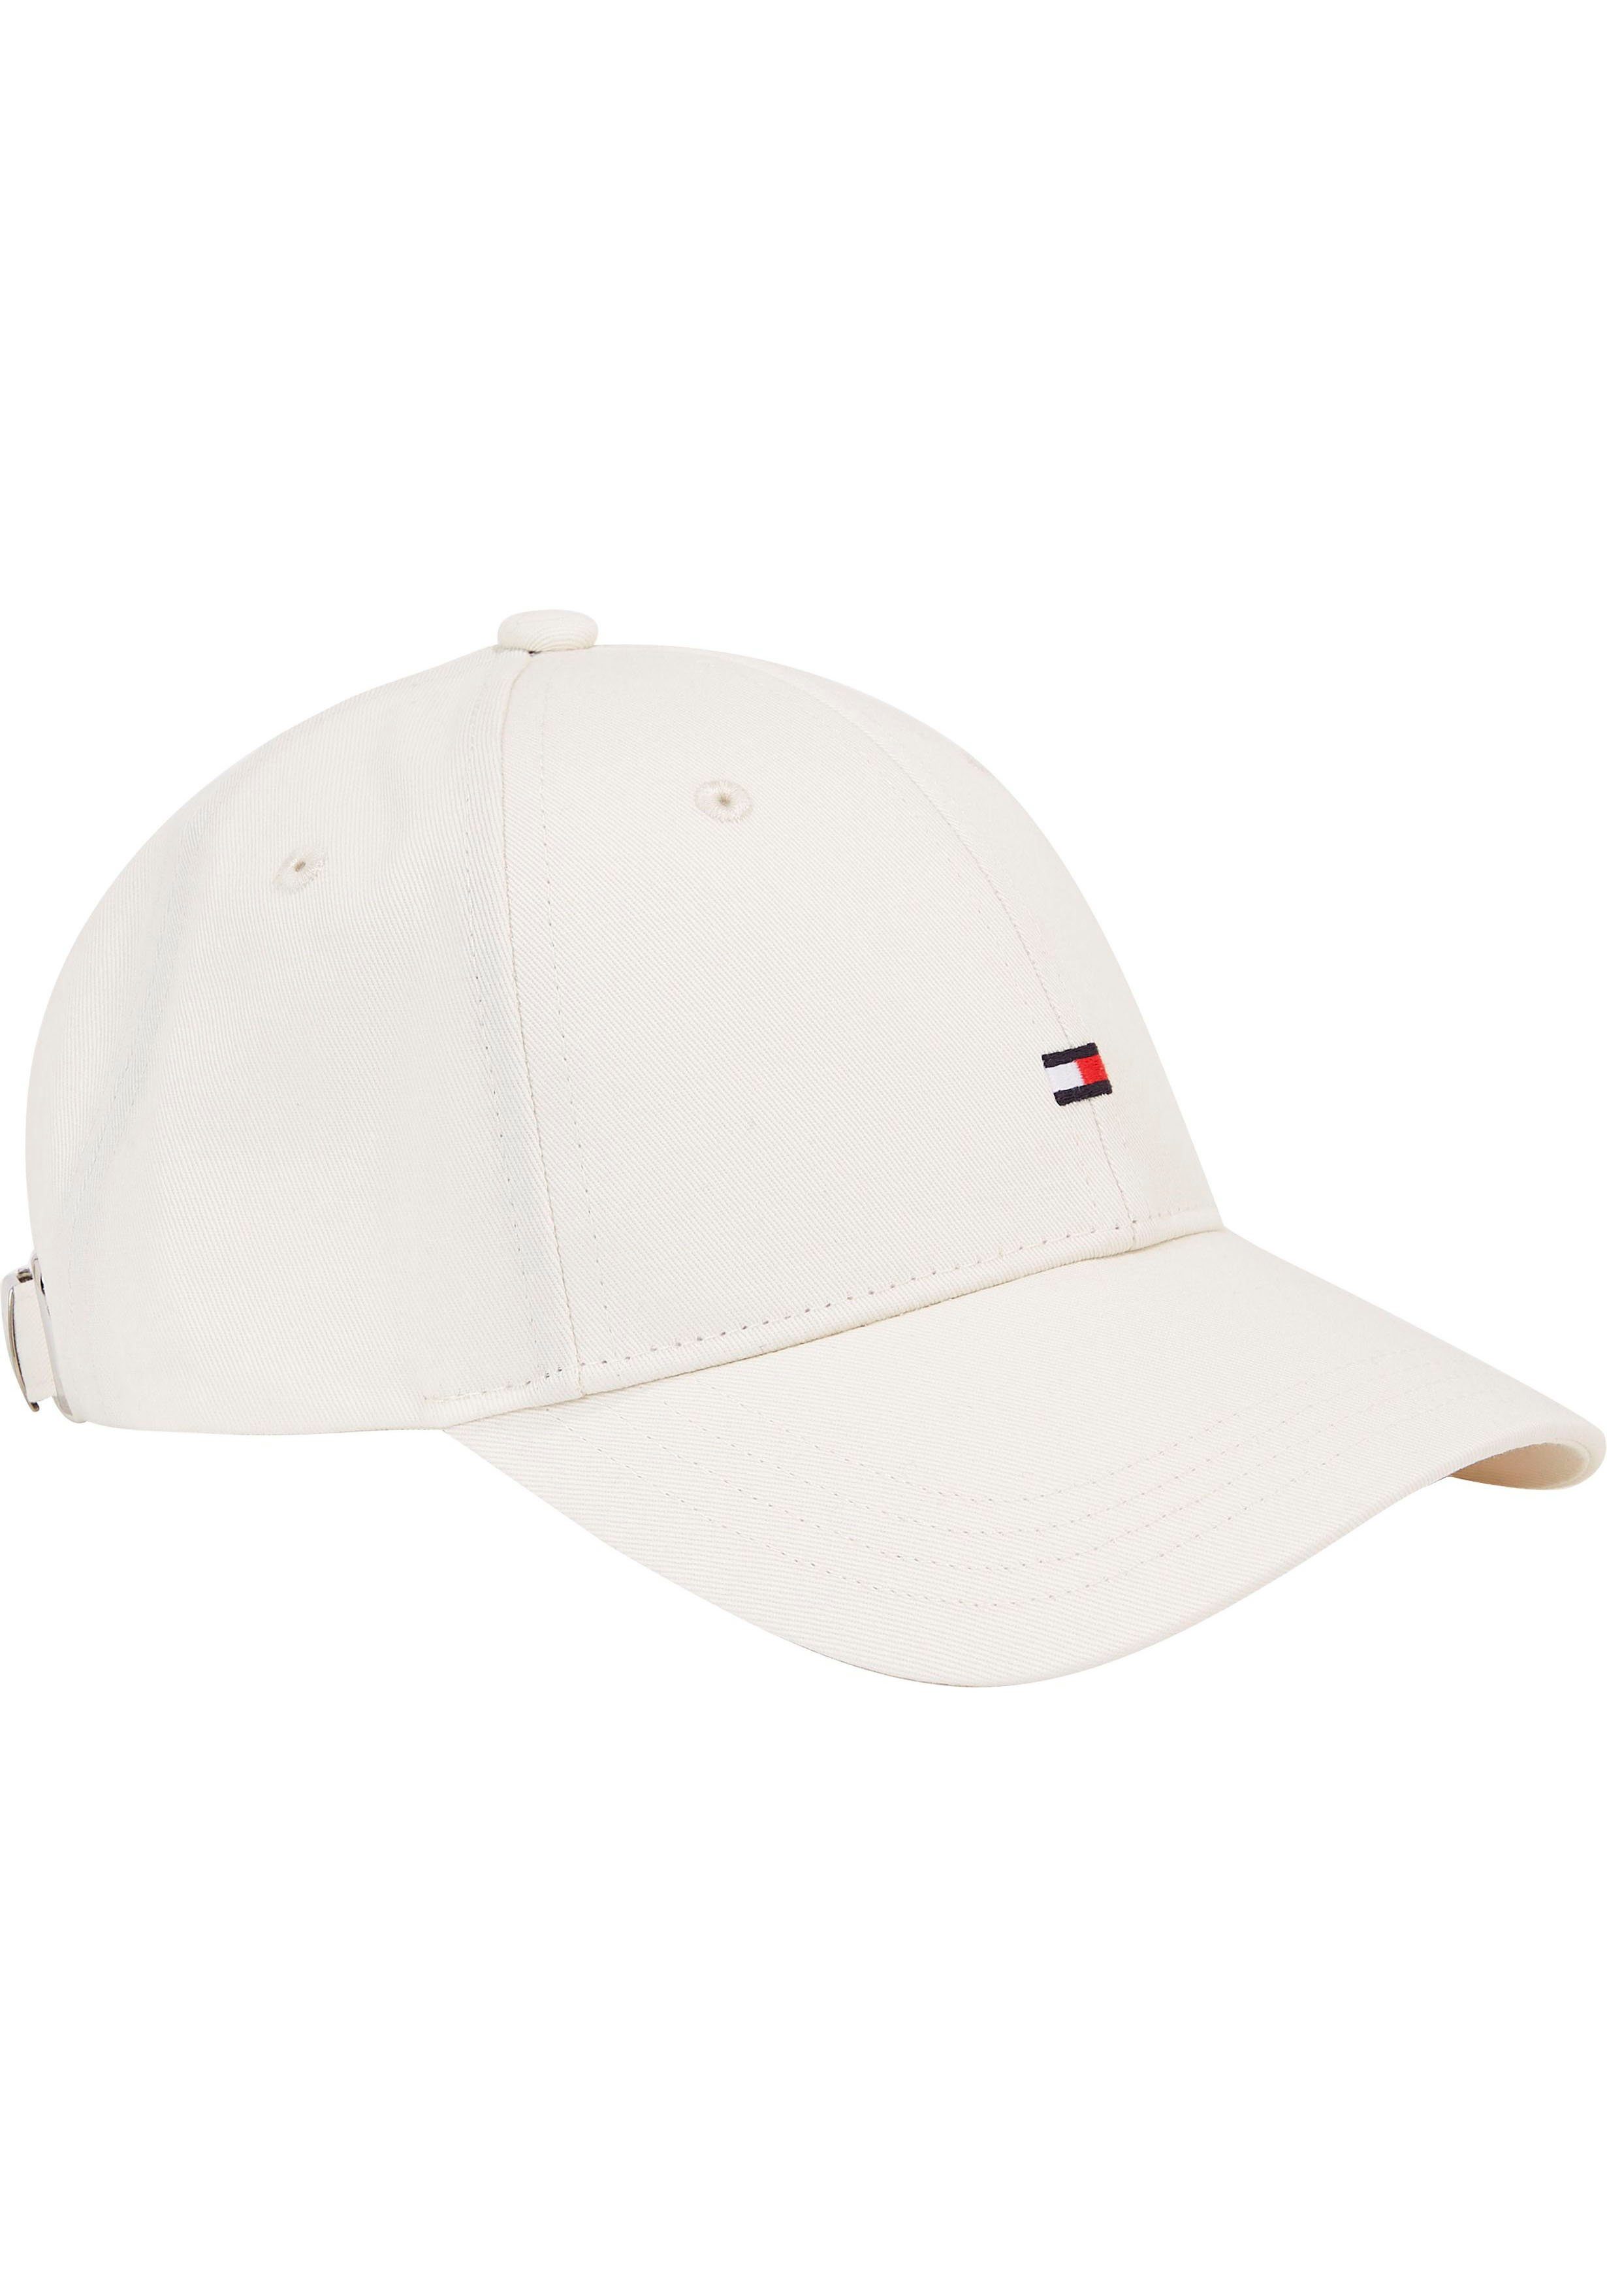 mit Hilfiger CAP Klemmverschluss Calico Cap Tommy SMALL FLAG Fitted